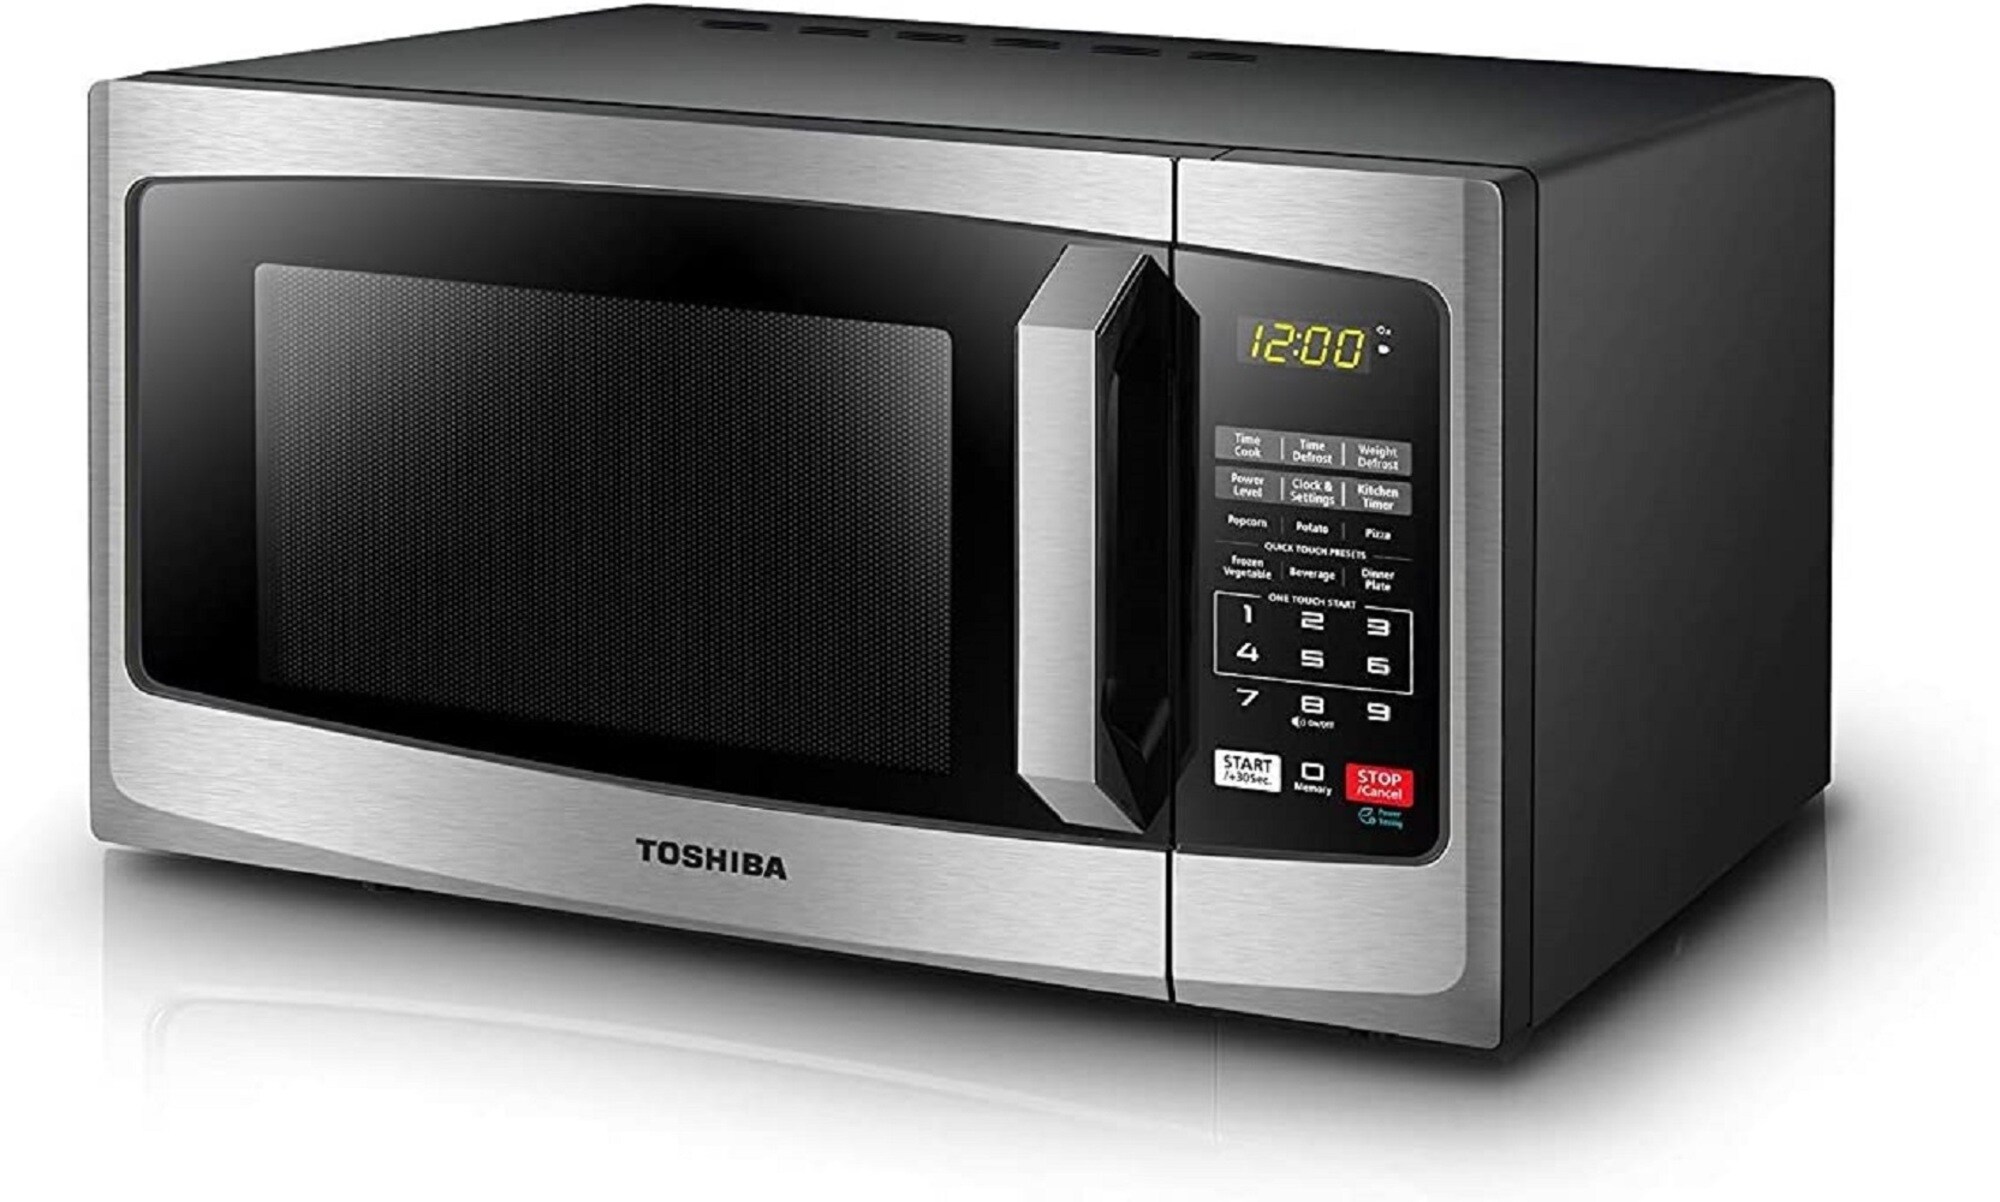 BLACK+DECKER Digital Microwave Oven with Turntable Push-Button Door, Child  Safety Lock, Stainless Steel, 0.9 Cu.ft 